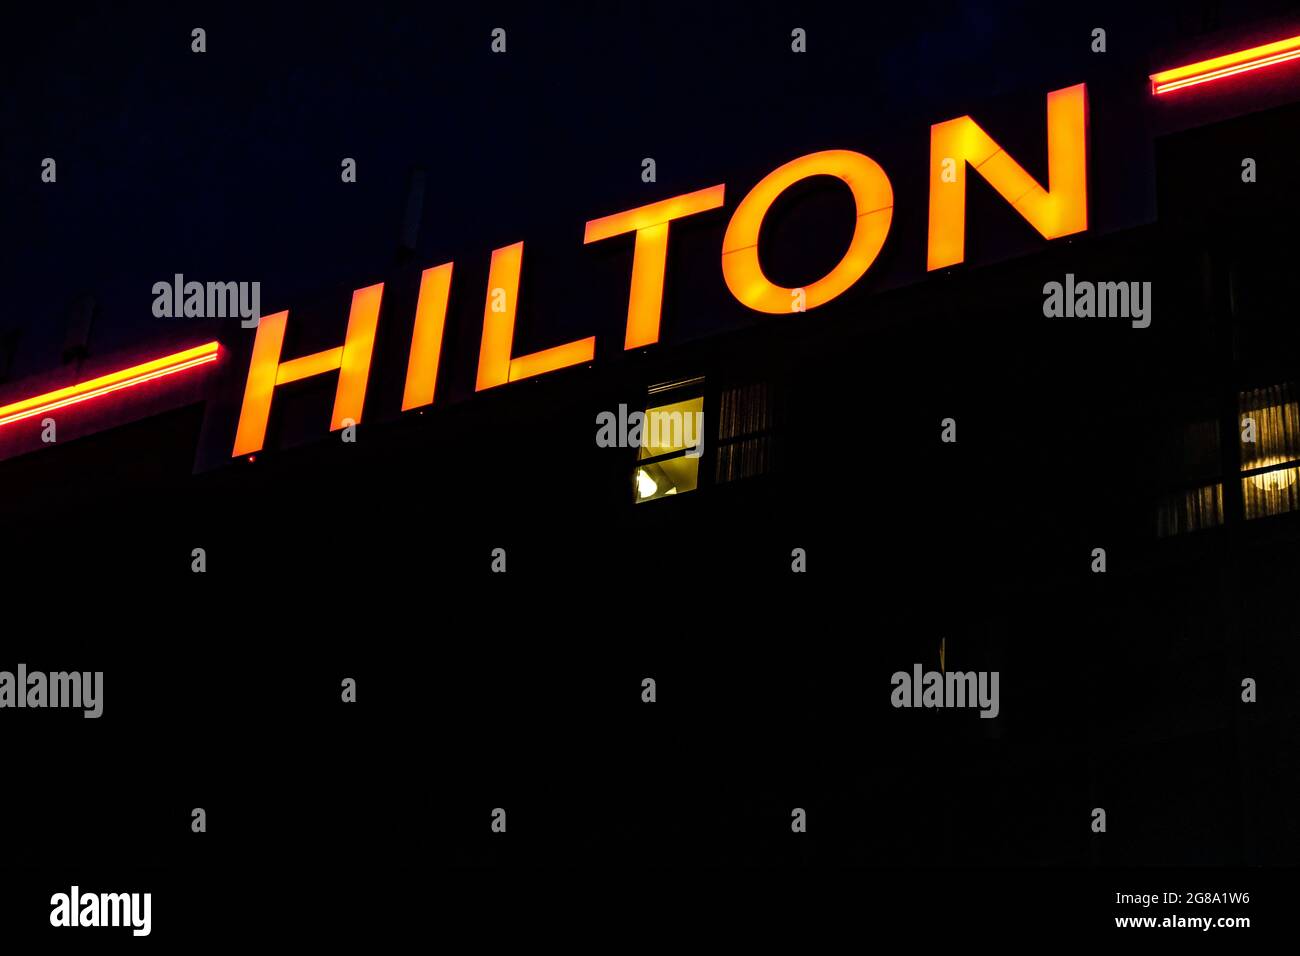 Night view of the Hilton logo on a sign on the Hilton at Chicago's O'Hare Airport, USA. Stock Photo